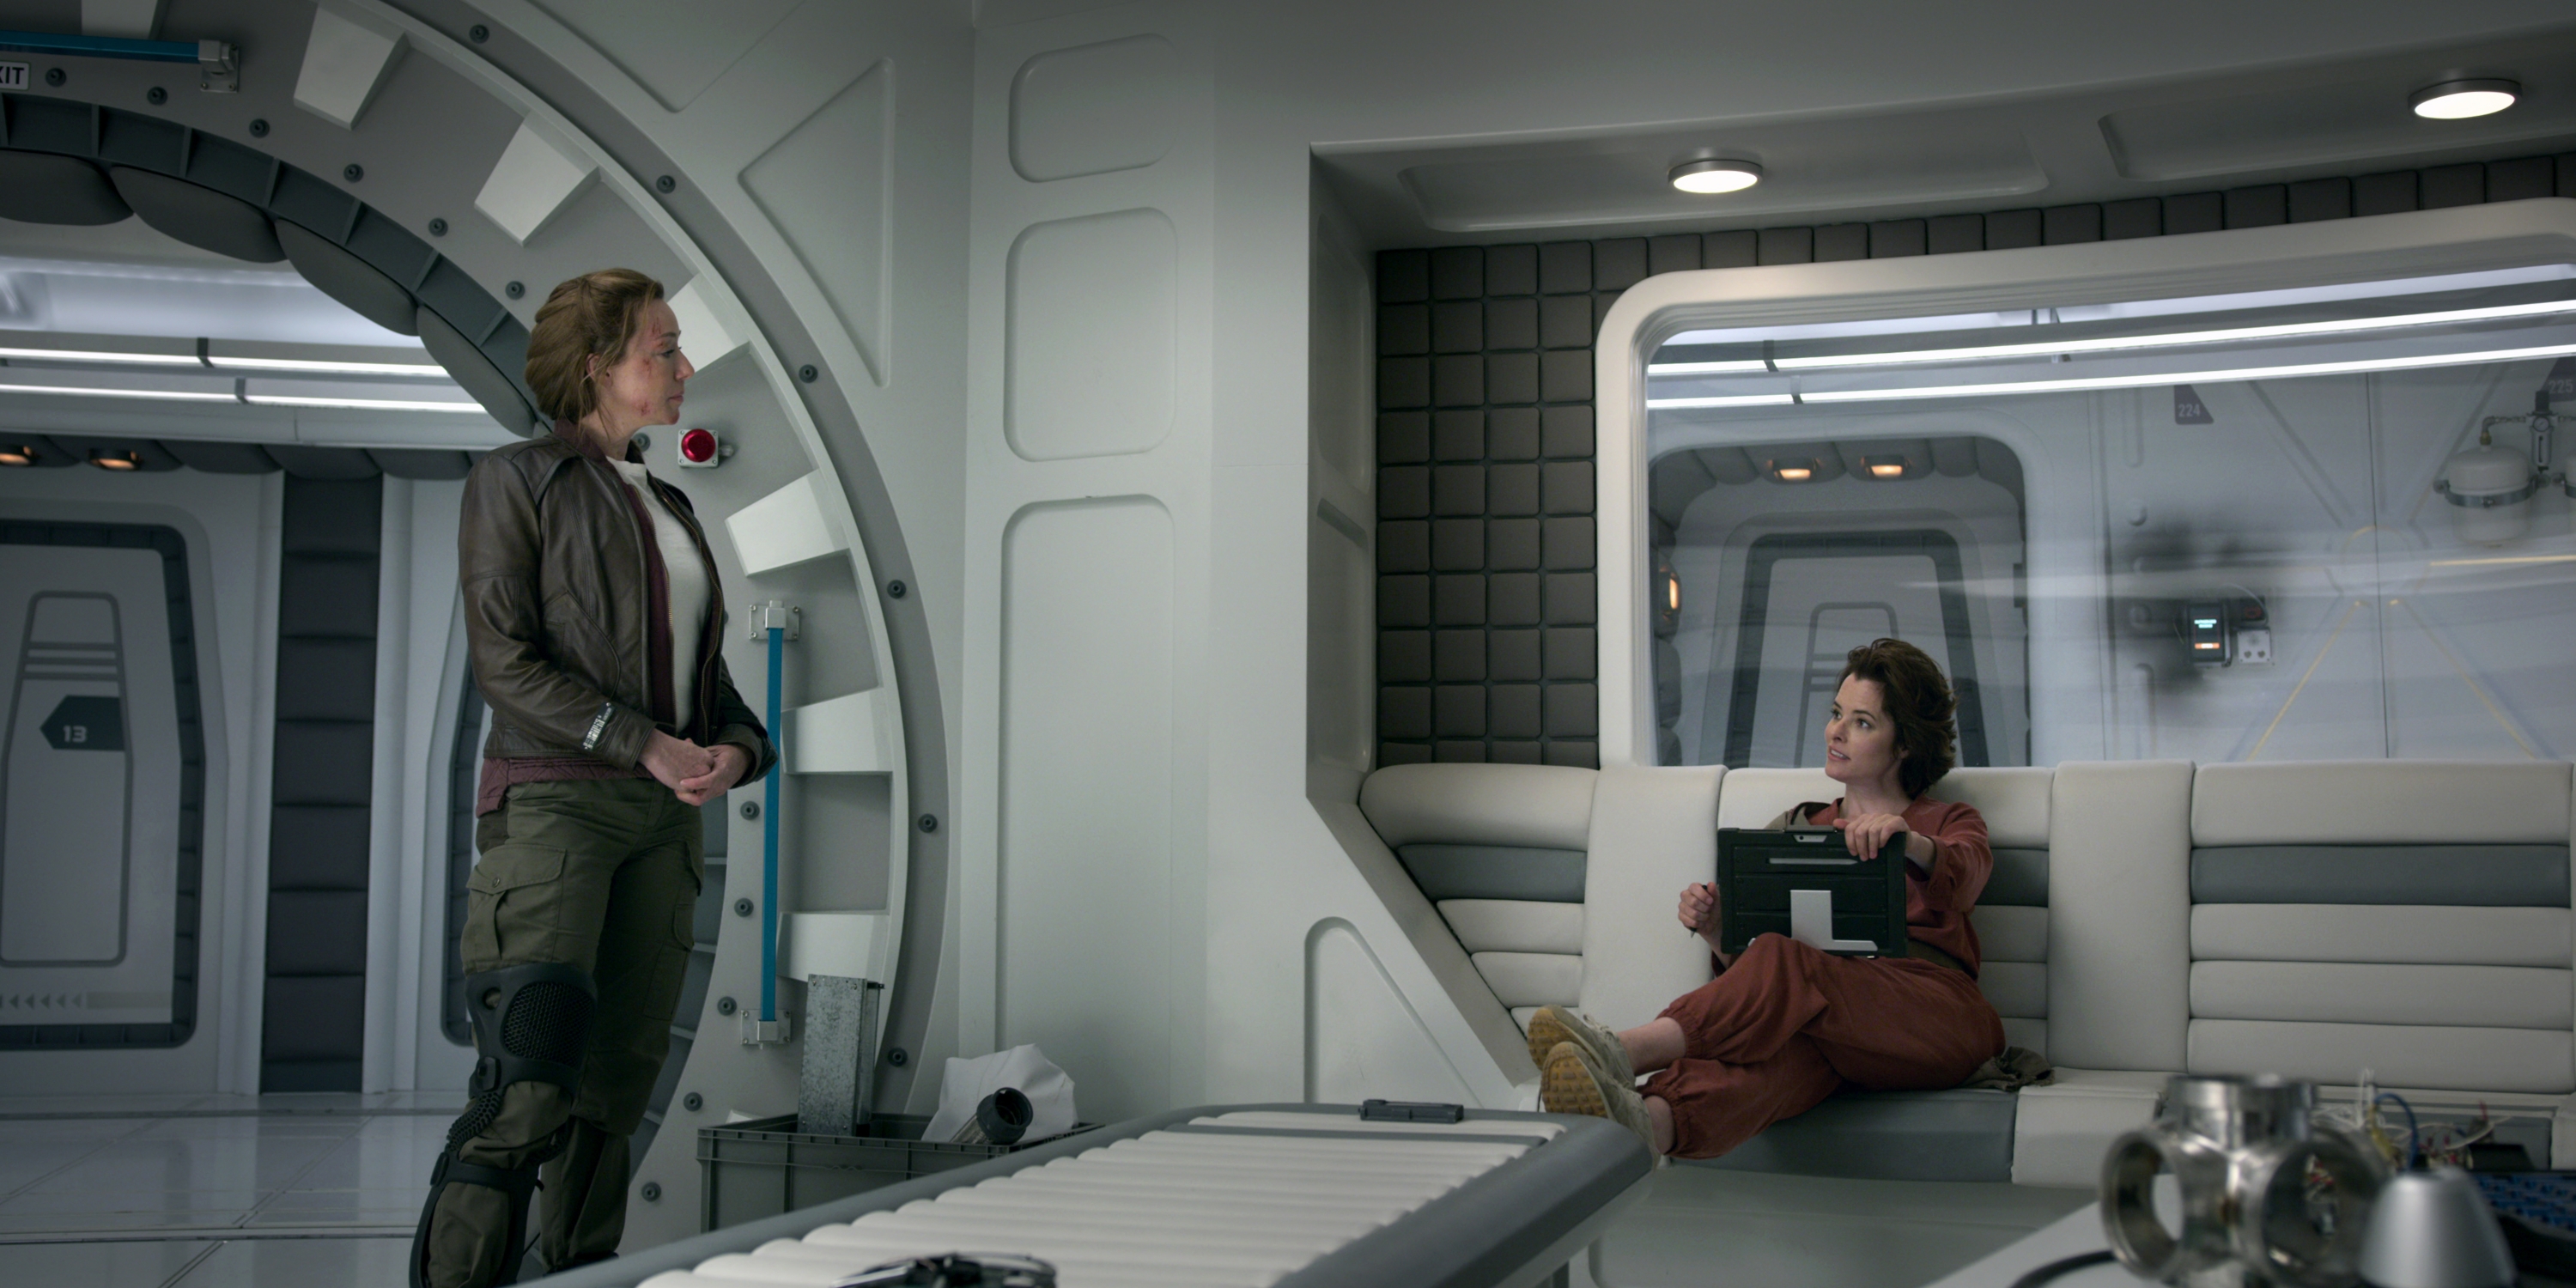 tv show, lost in space, dr zachary smith, maureen robinson, molly parker, parker posey